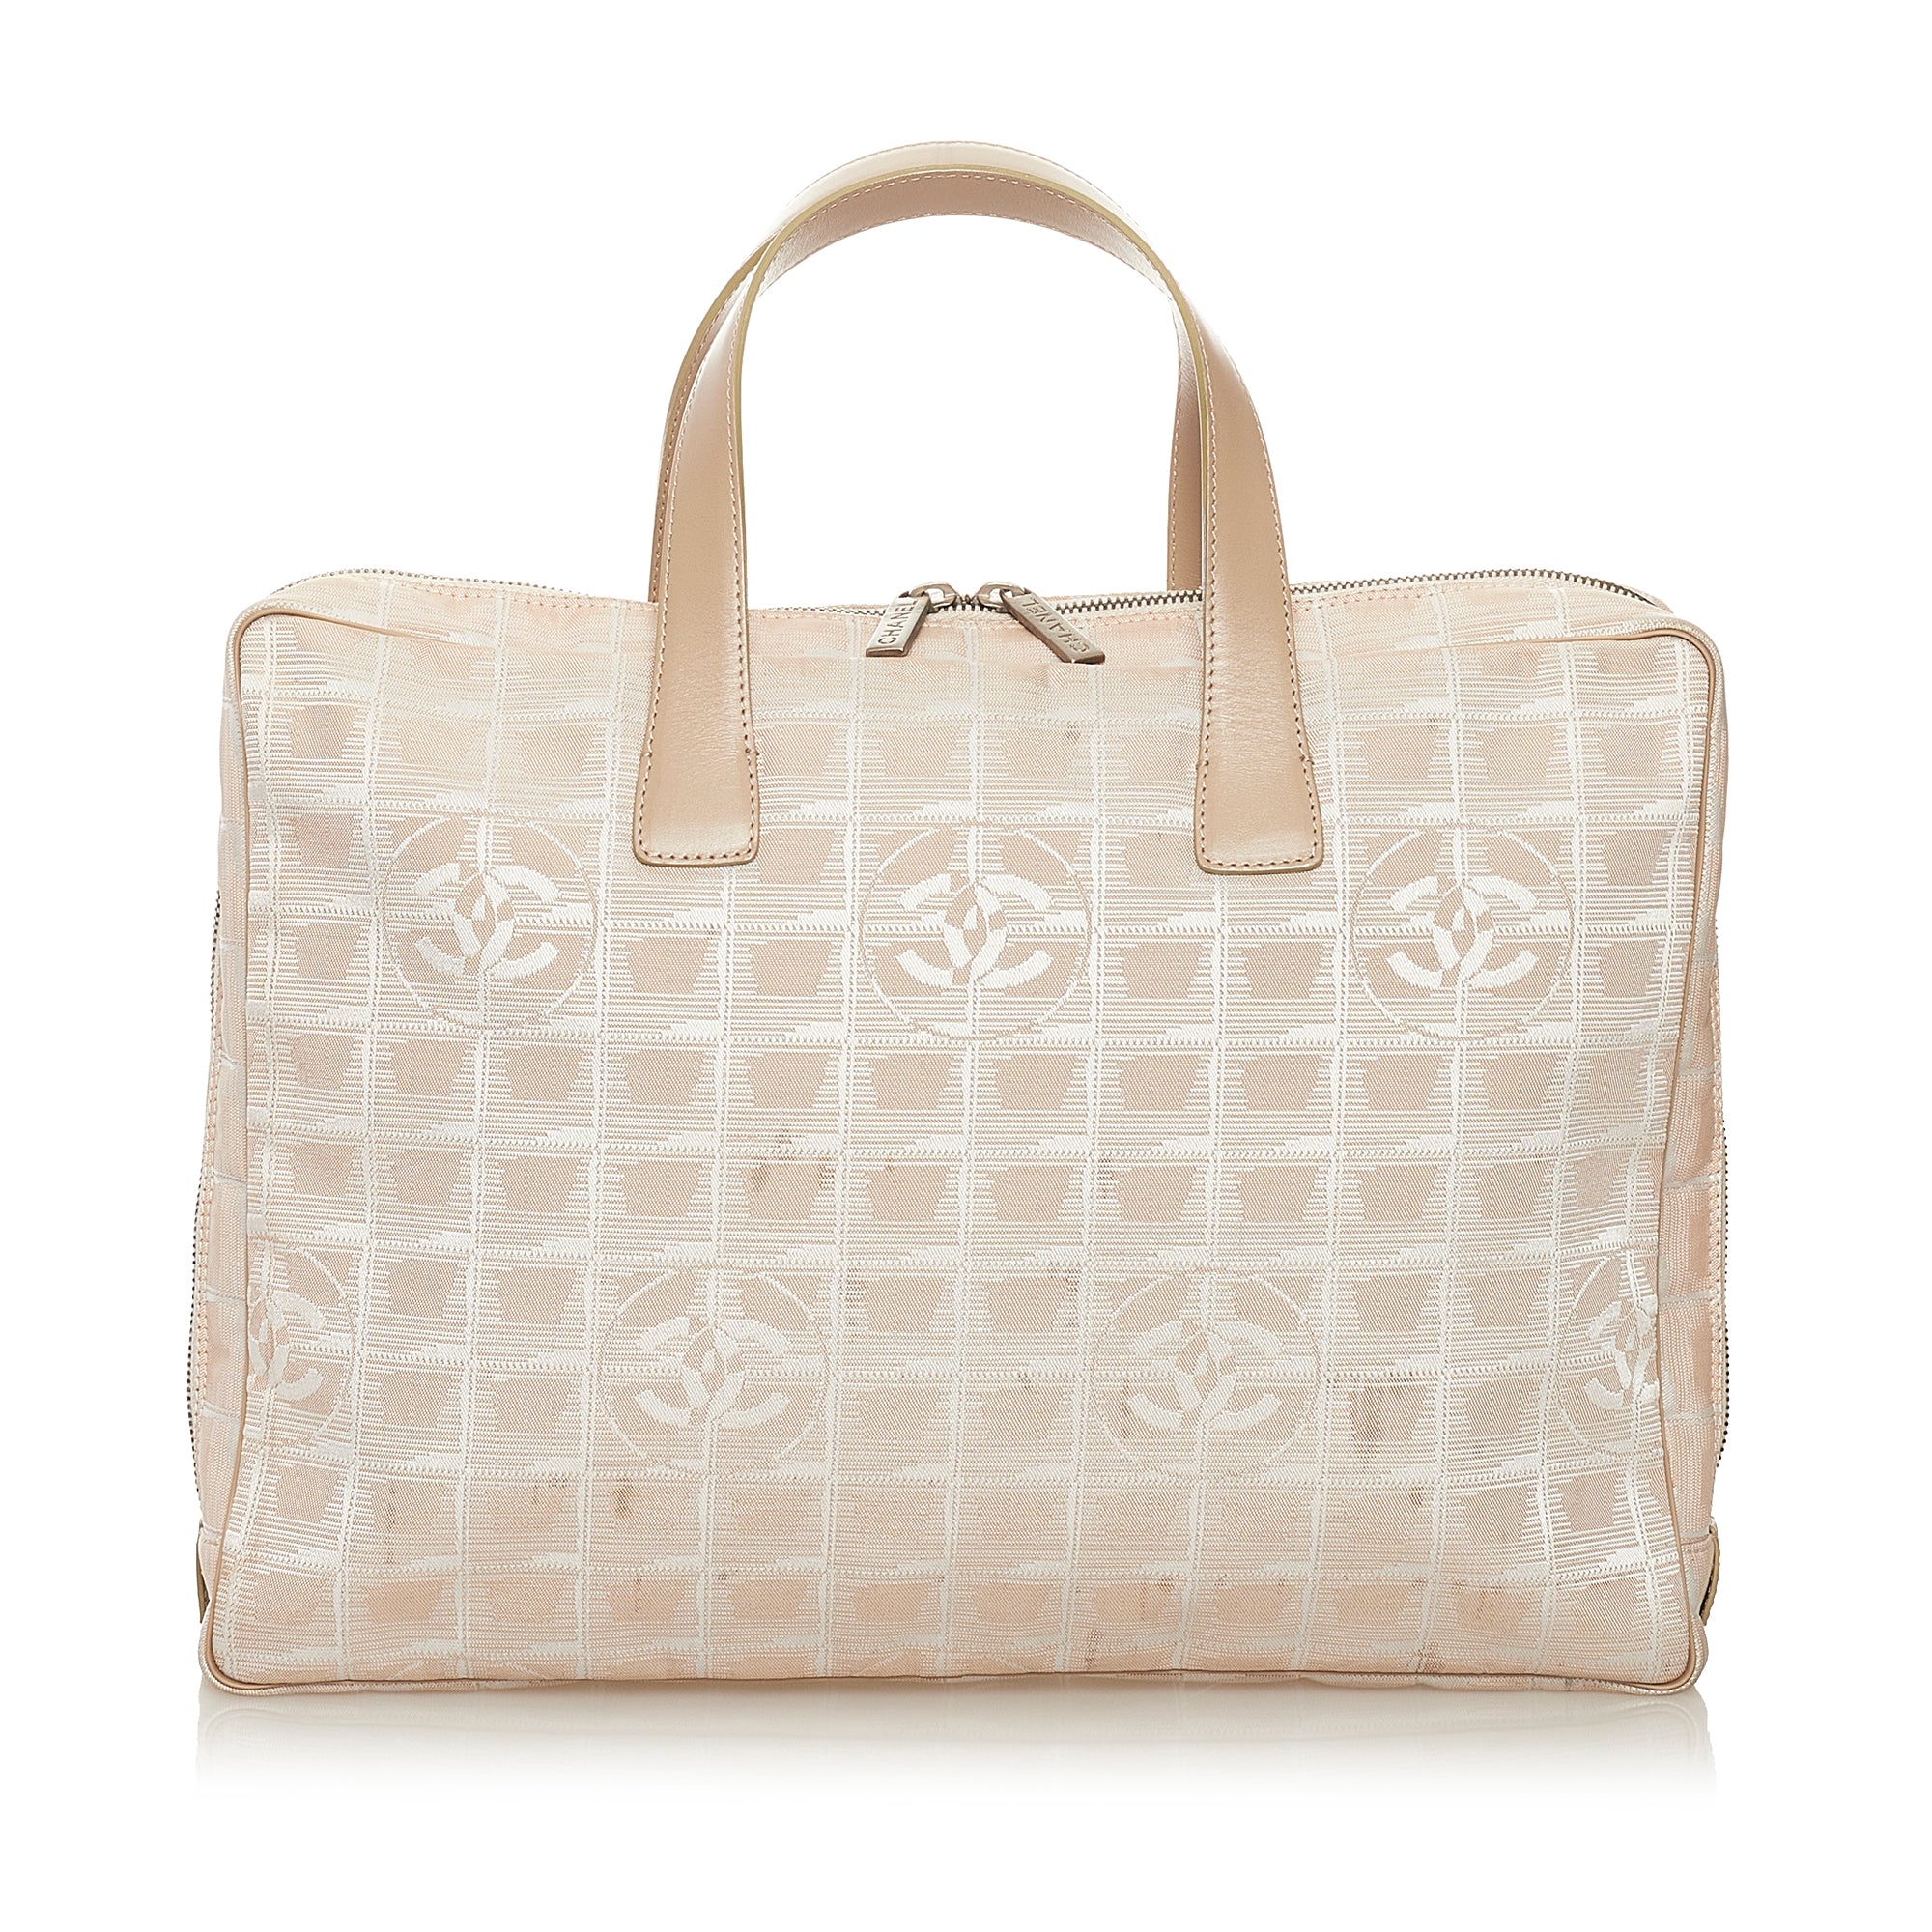 Bag Battles Chanel Deauville Tote Vs Chanel Shopping Tote  luxfy